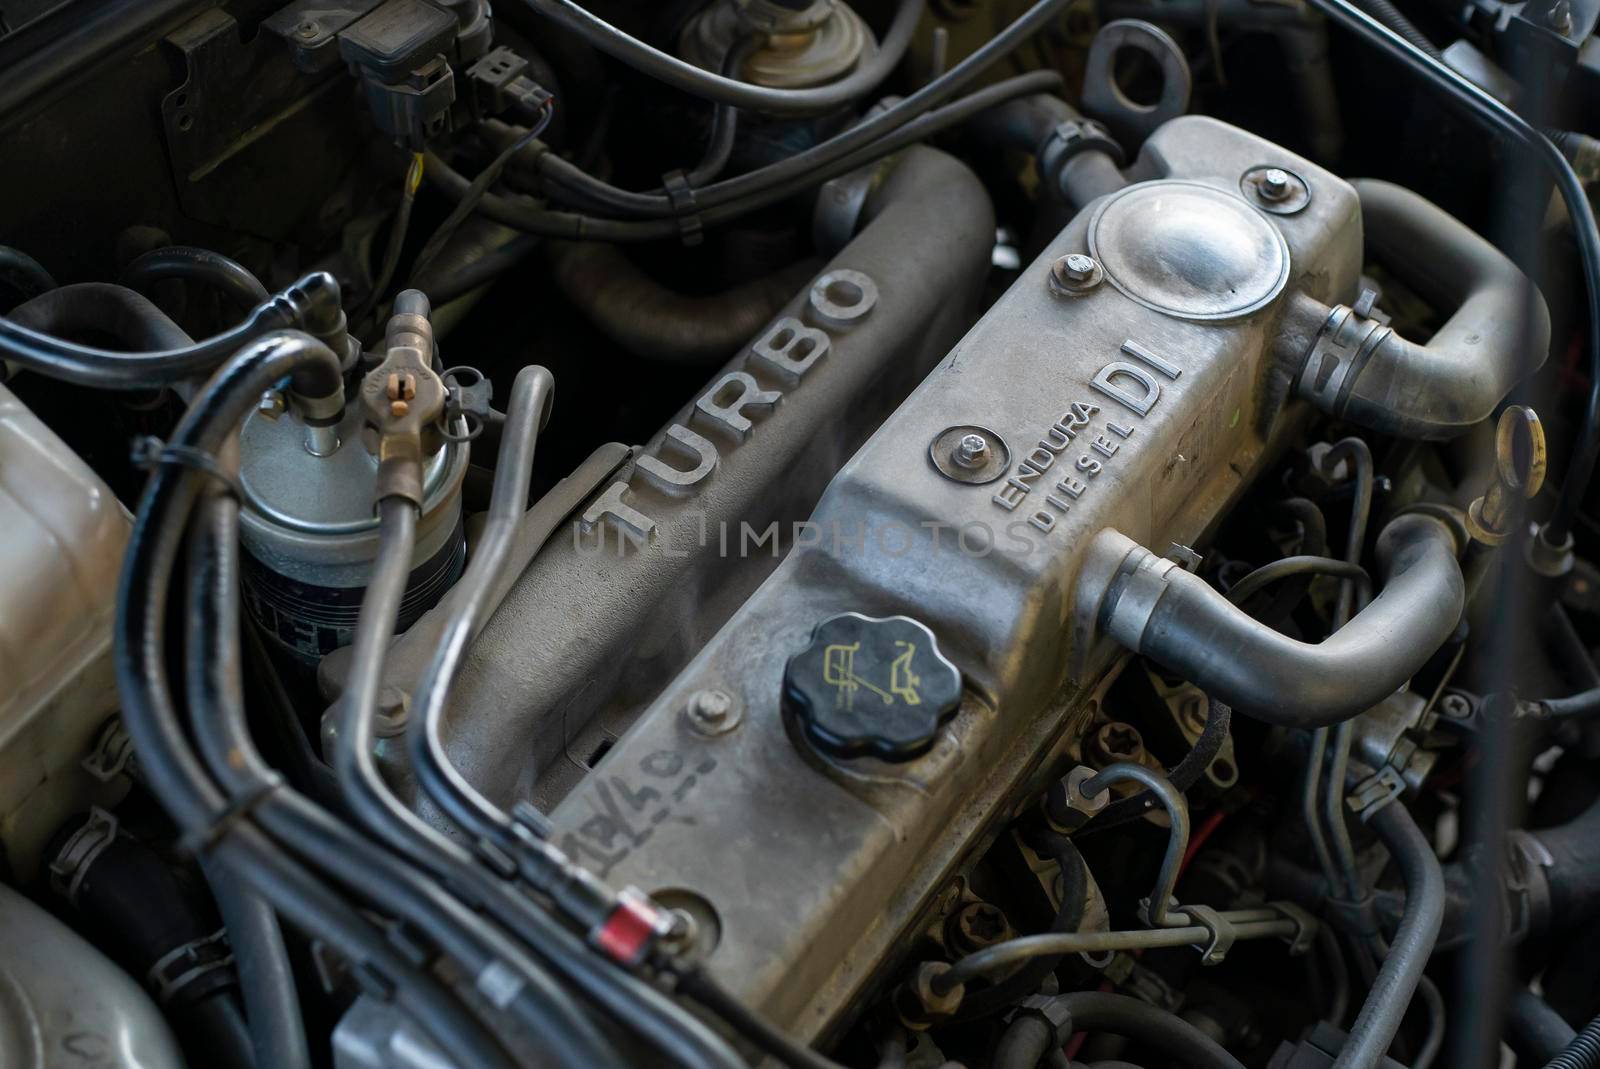 Detail of a turbo diesel engine by pippocarlot